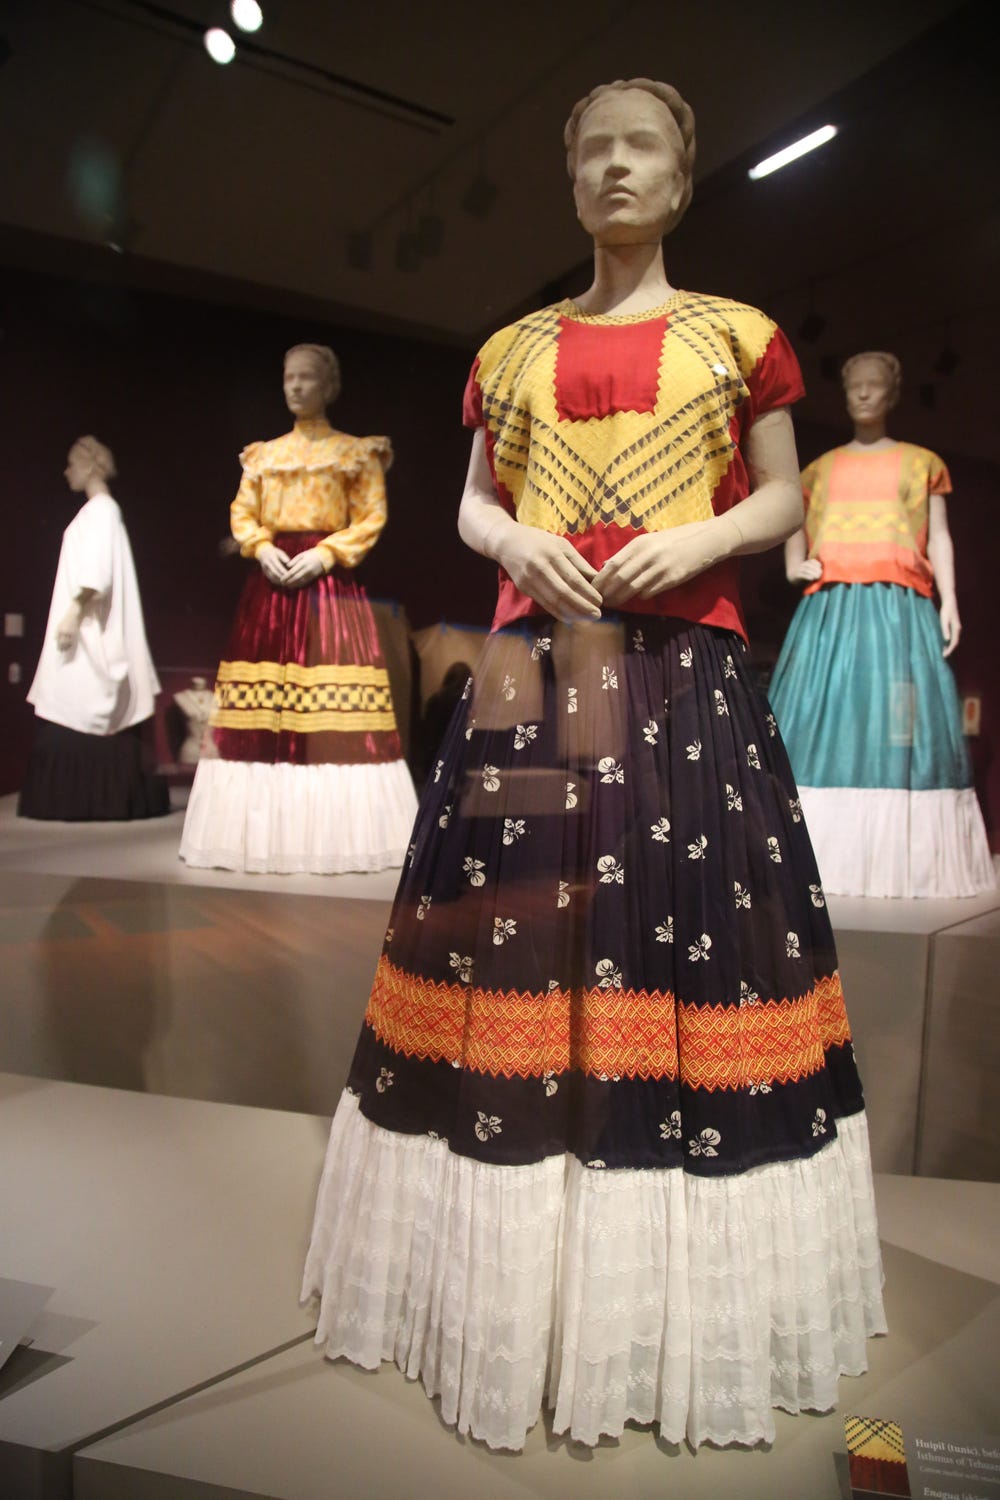 mannequins wearing blouses and floor-length skirts